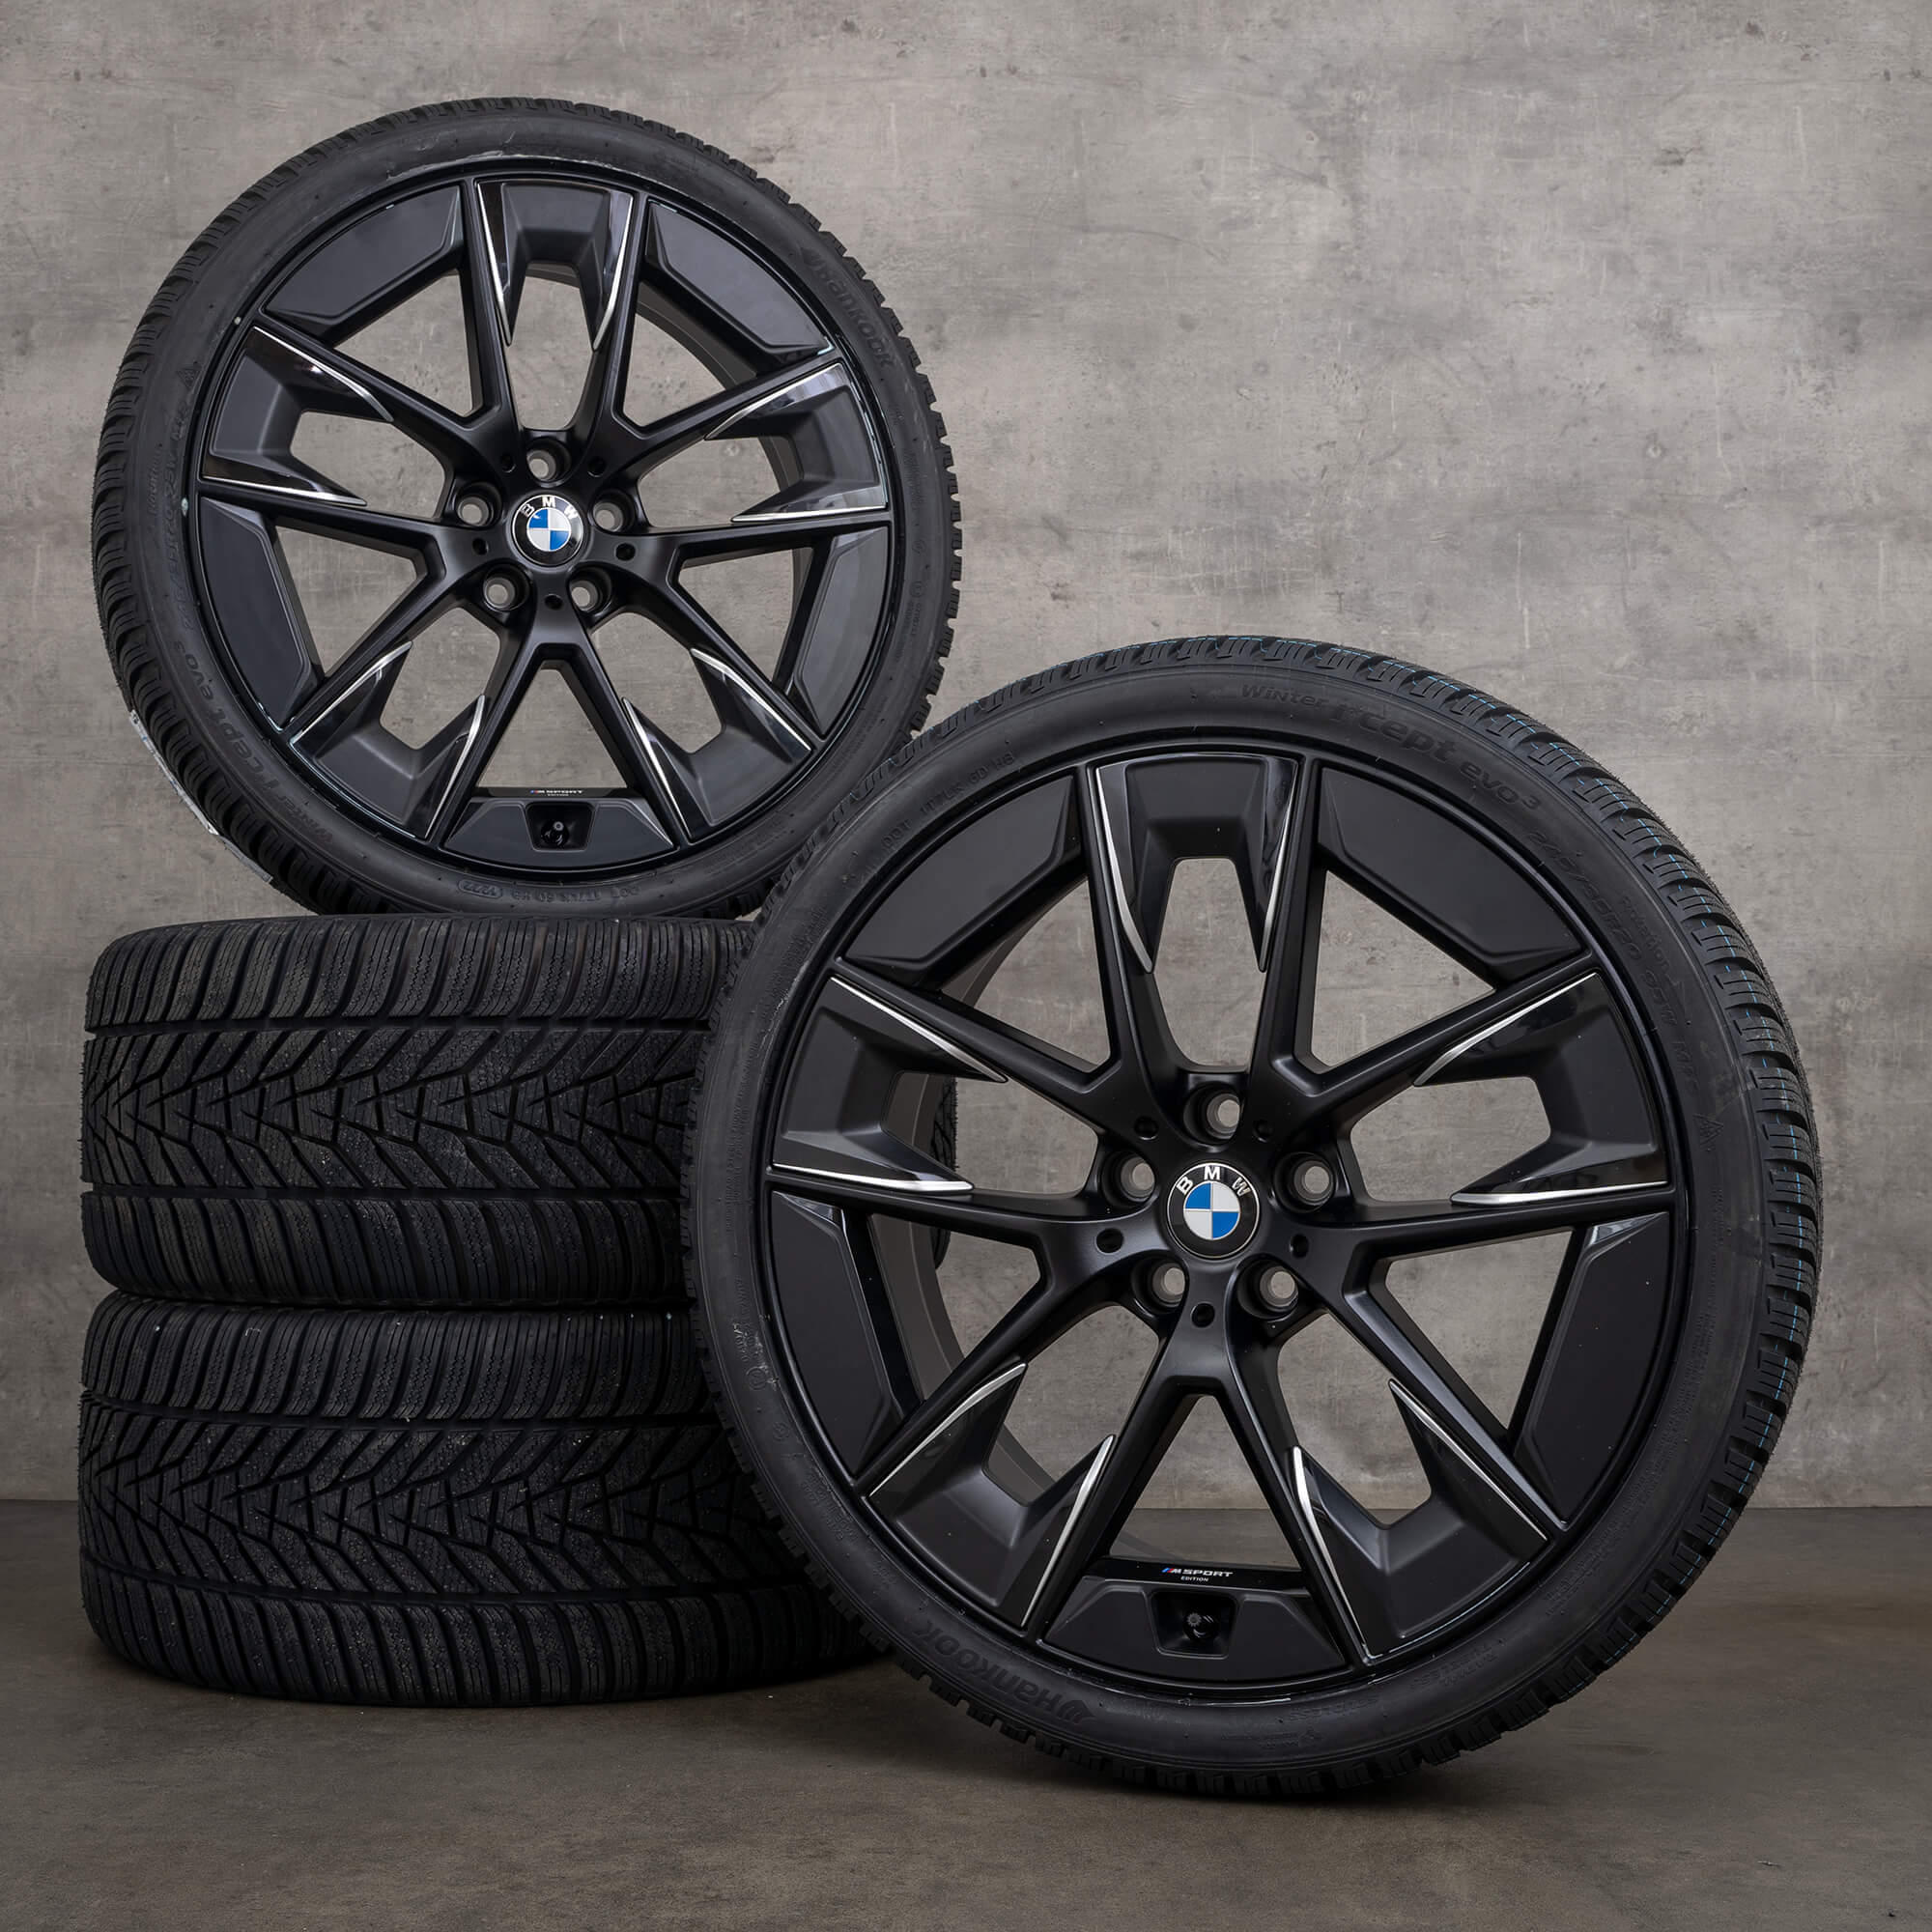 BMW 5 Series G30 G31 winter tires 20 inch rims styling 1001i